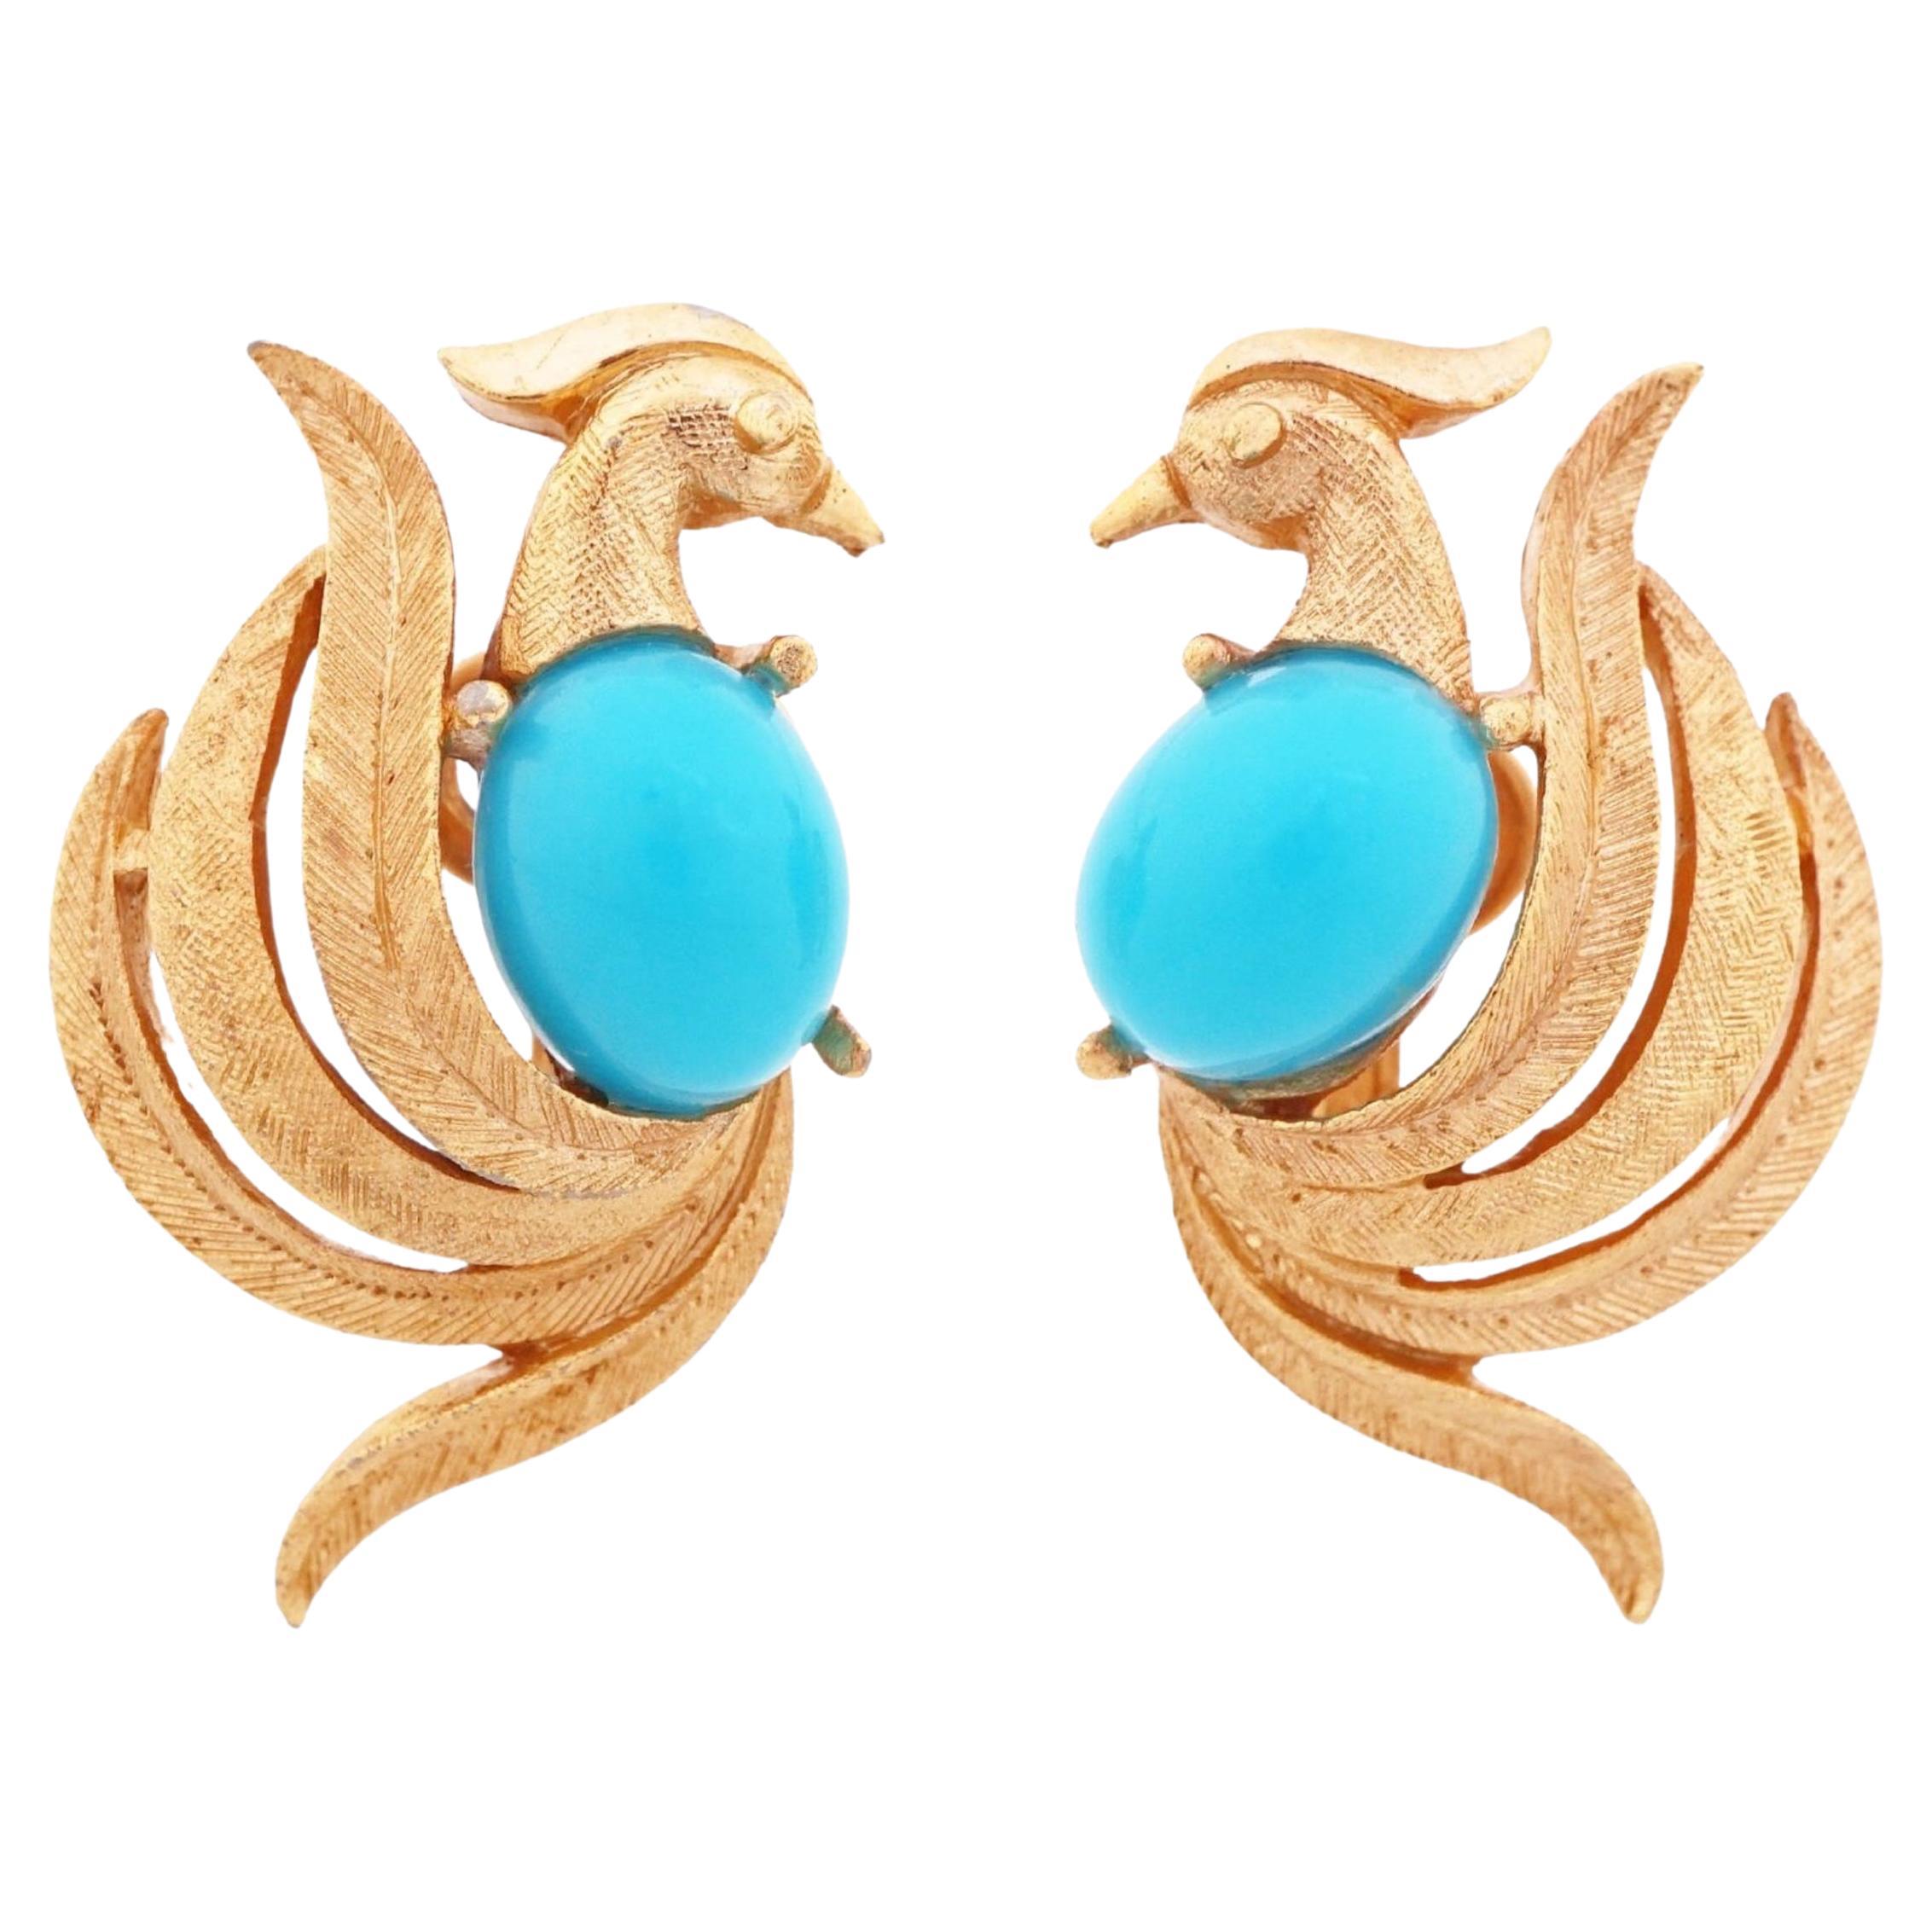 Birds of Paradise Earrings With Turquoise Belly By Trifari For Avon, 1960s